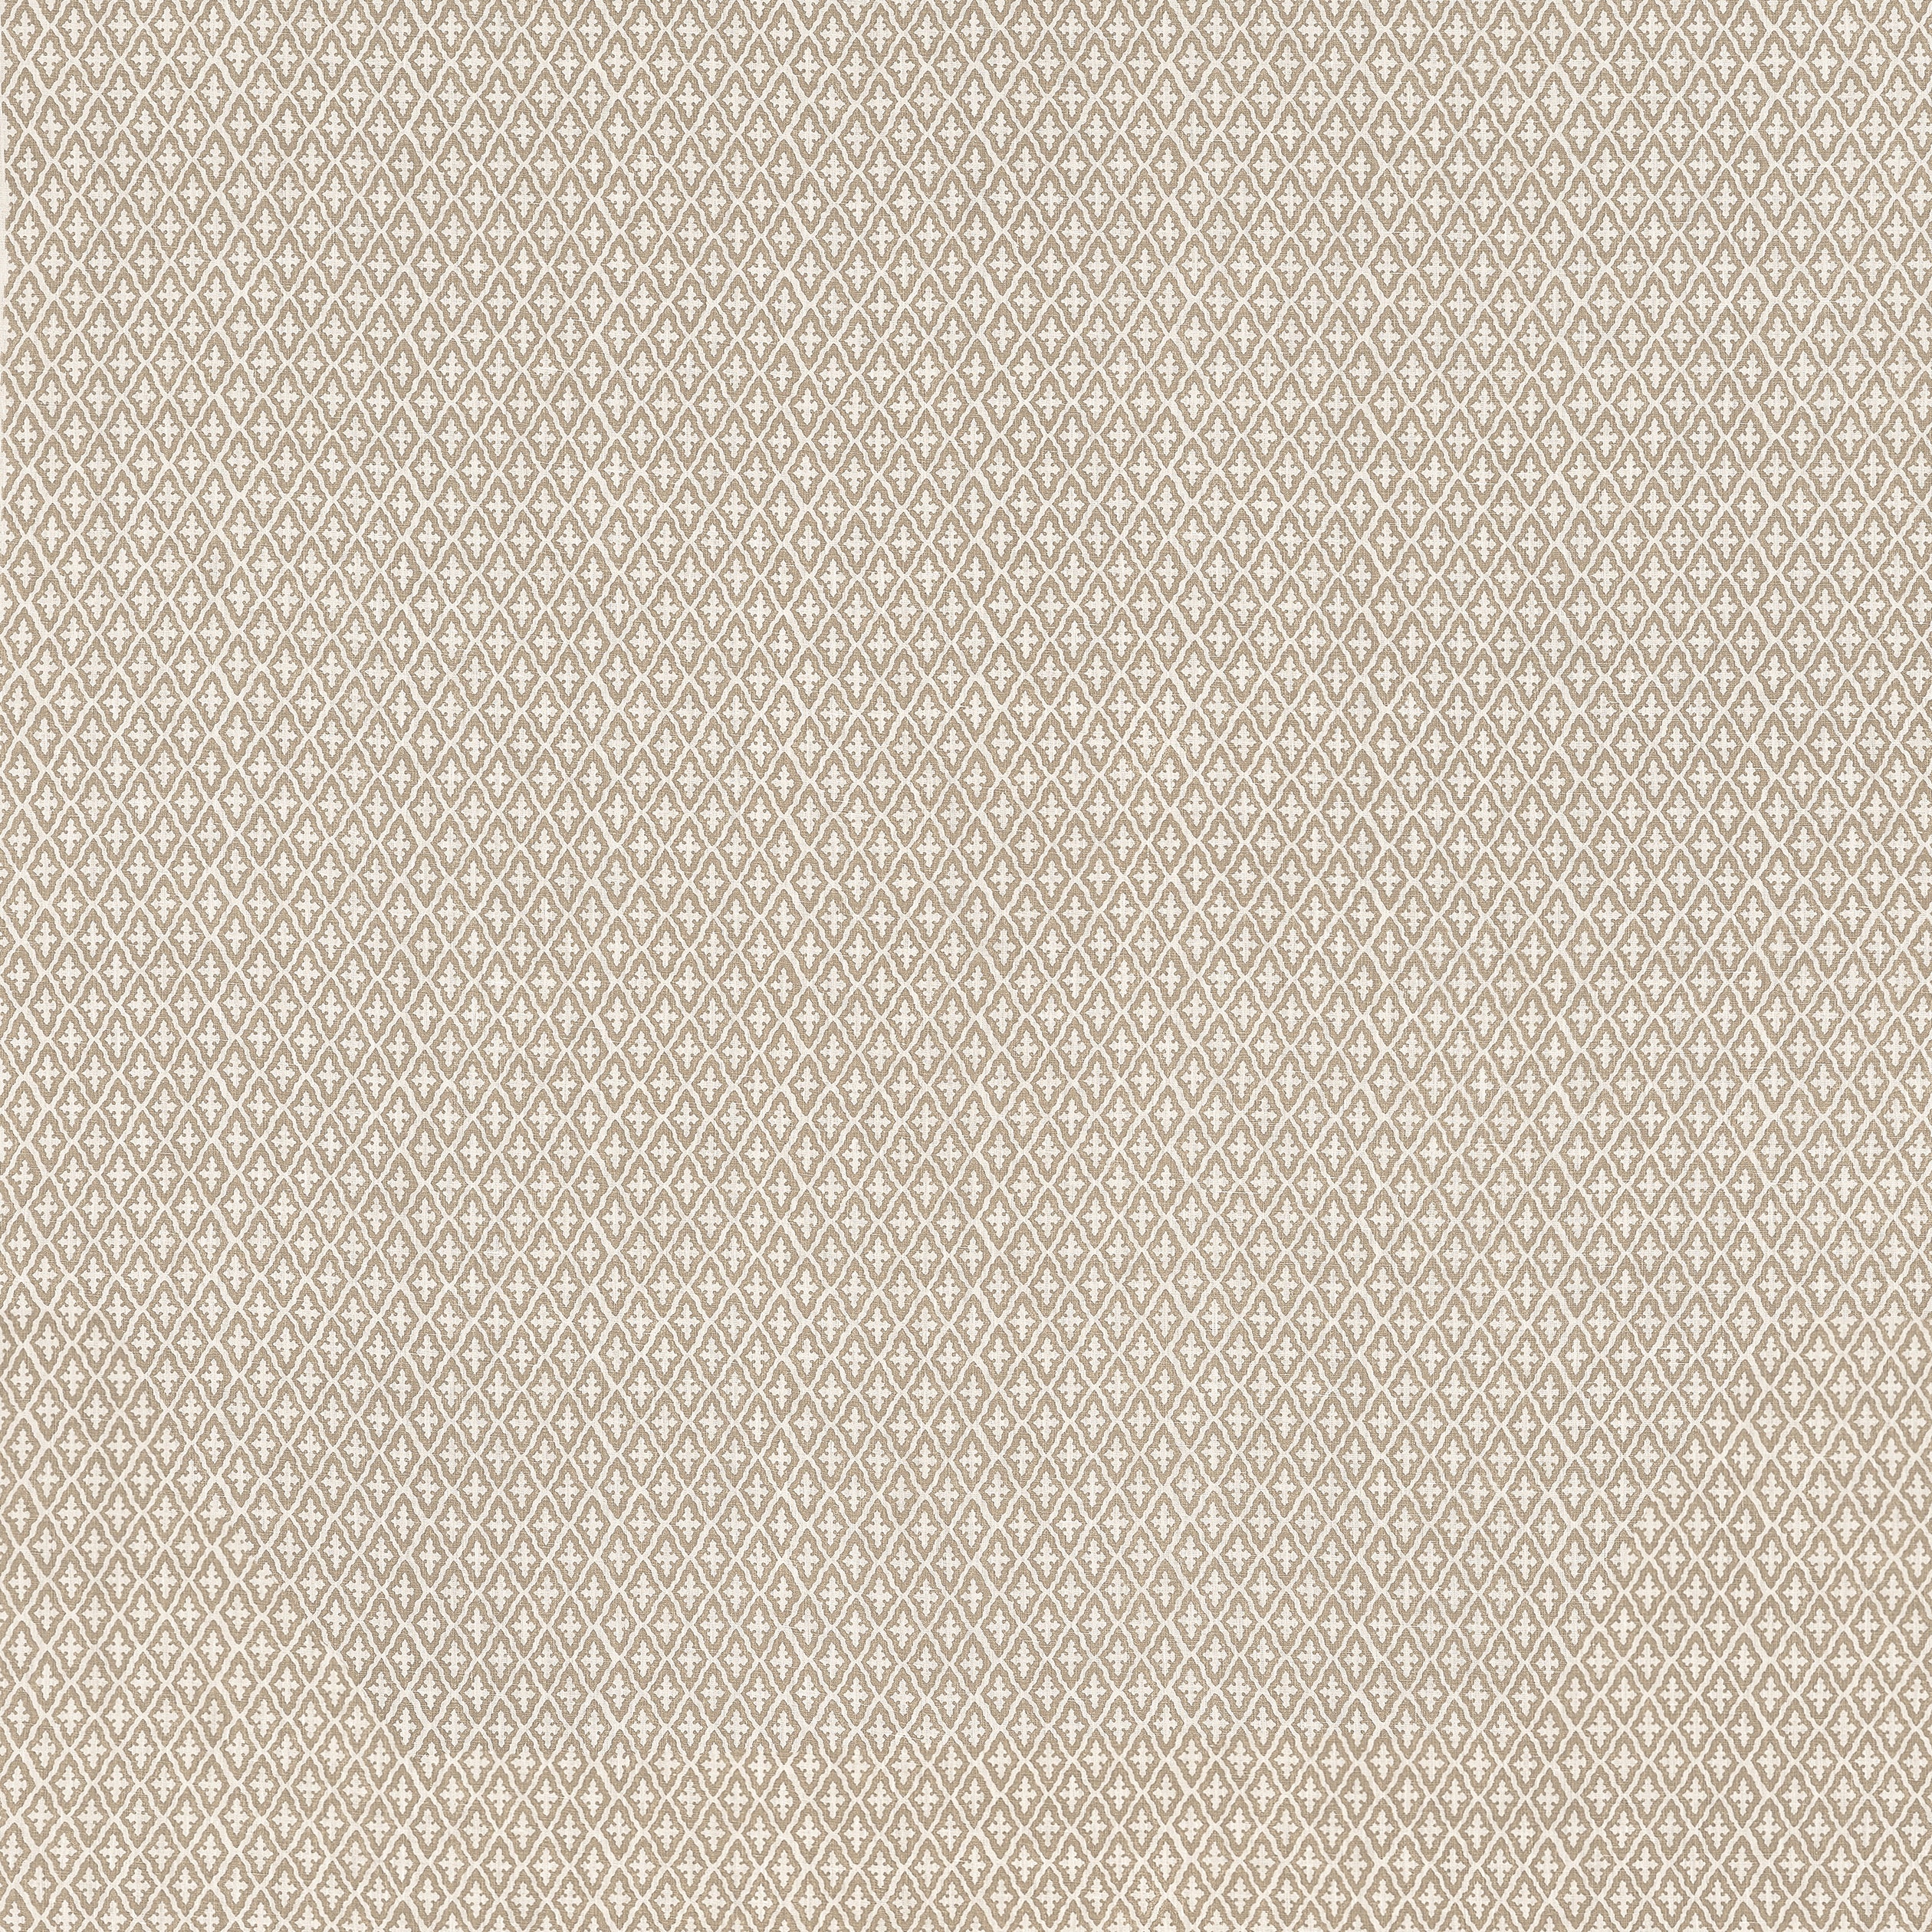 Lindsey fabric in sand color - pattern number AF57809 - by Anna French in the Bristol collection